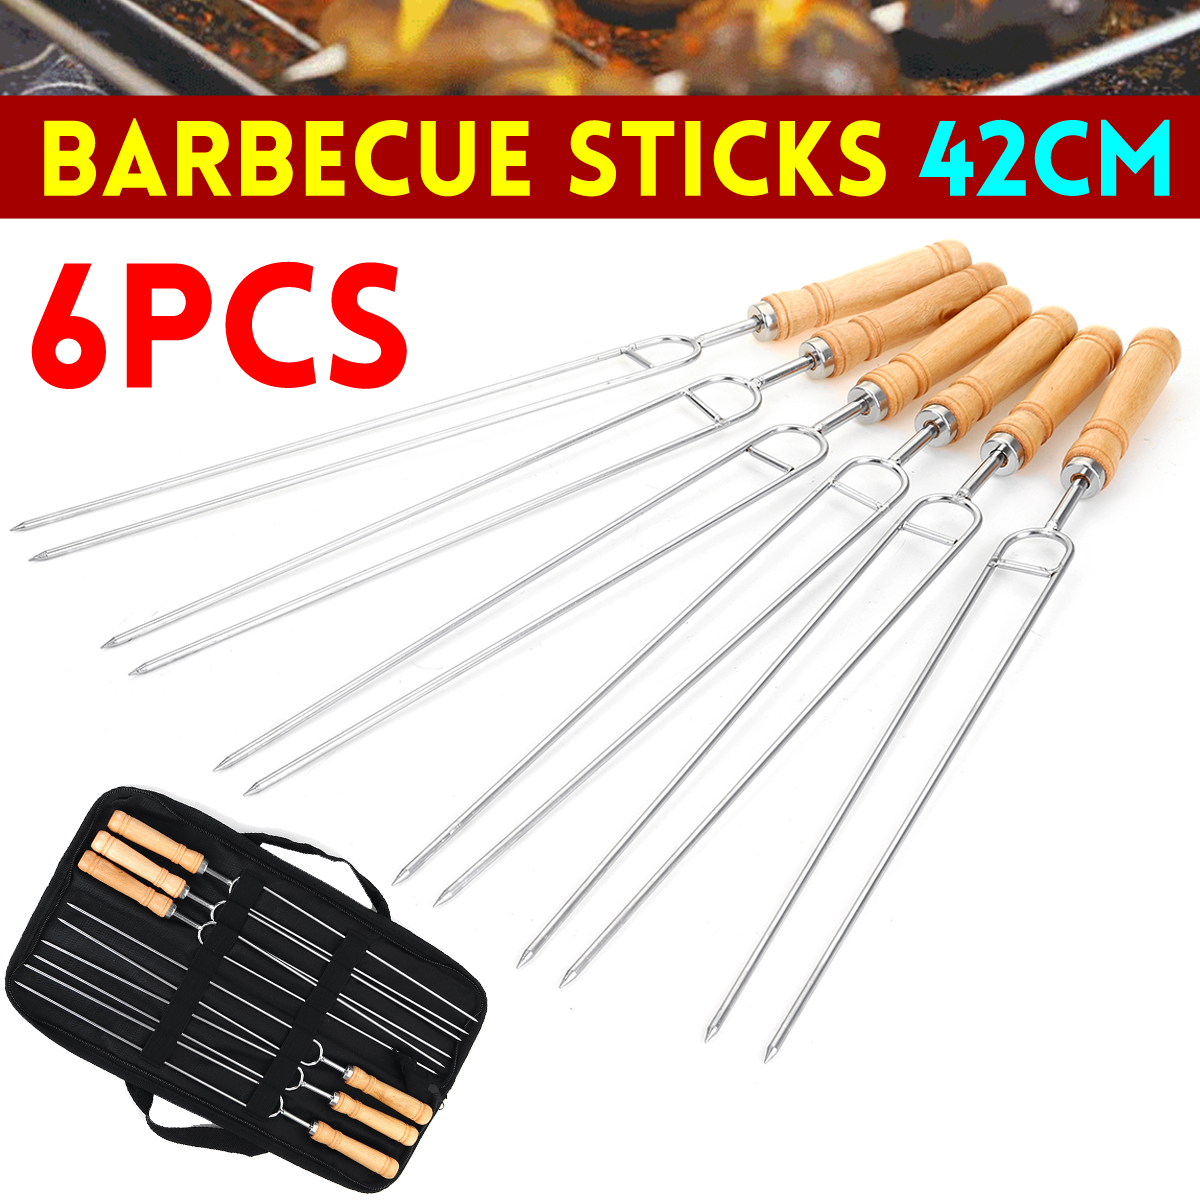 6PCSSet-Stainless-Steel-Wire-BBQ-Skewers-Wood-Handle-Grill-Roasting-Sticks-Outdoor-Camping-BBQ-Tool-1806341-1